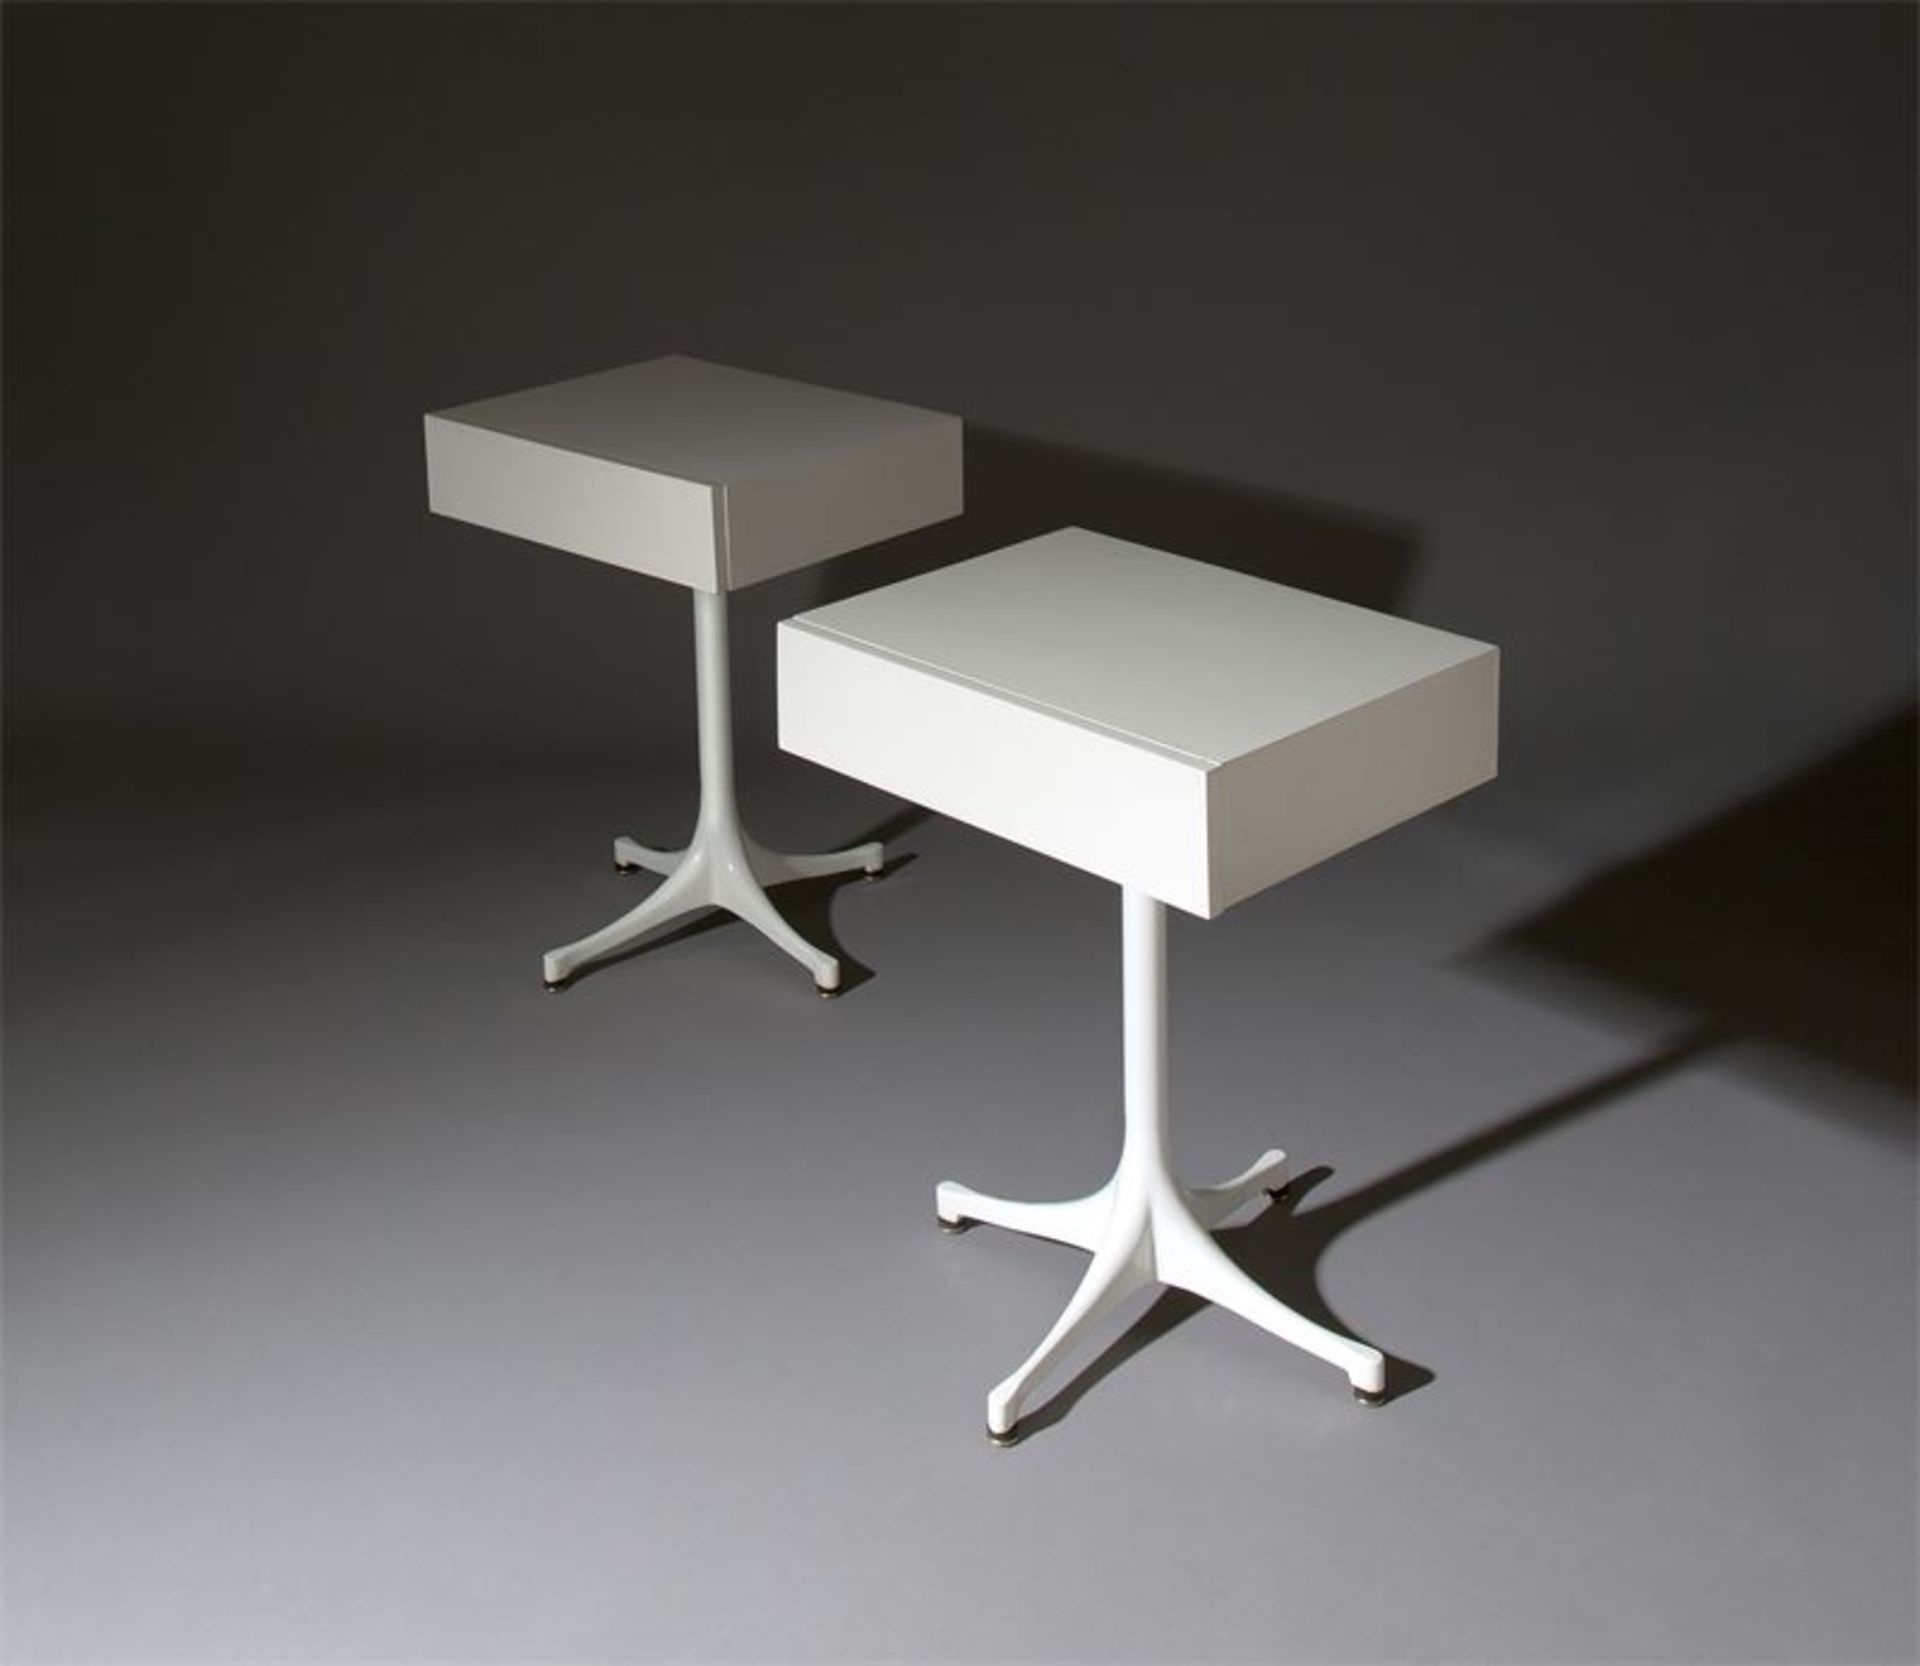 George Nelson (Hartford (Connecticut) 1908 – 1986 New York) Paar Pedestal Tables (Modell 5655). 1956